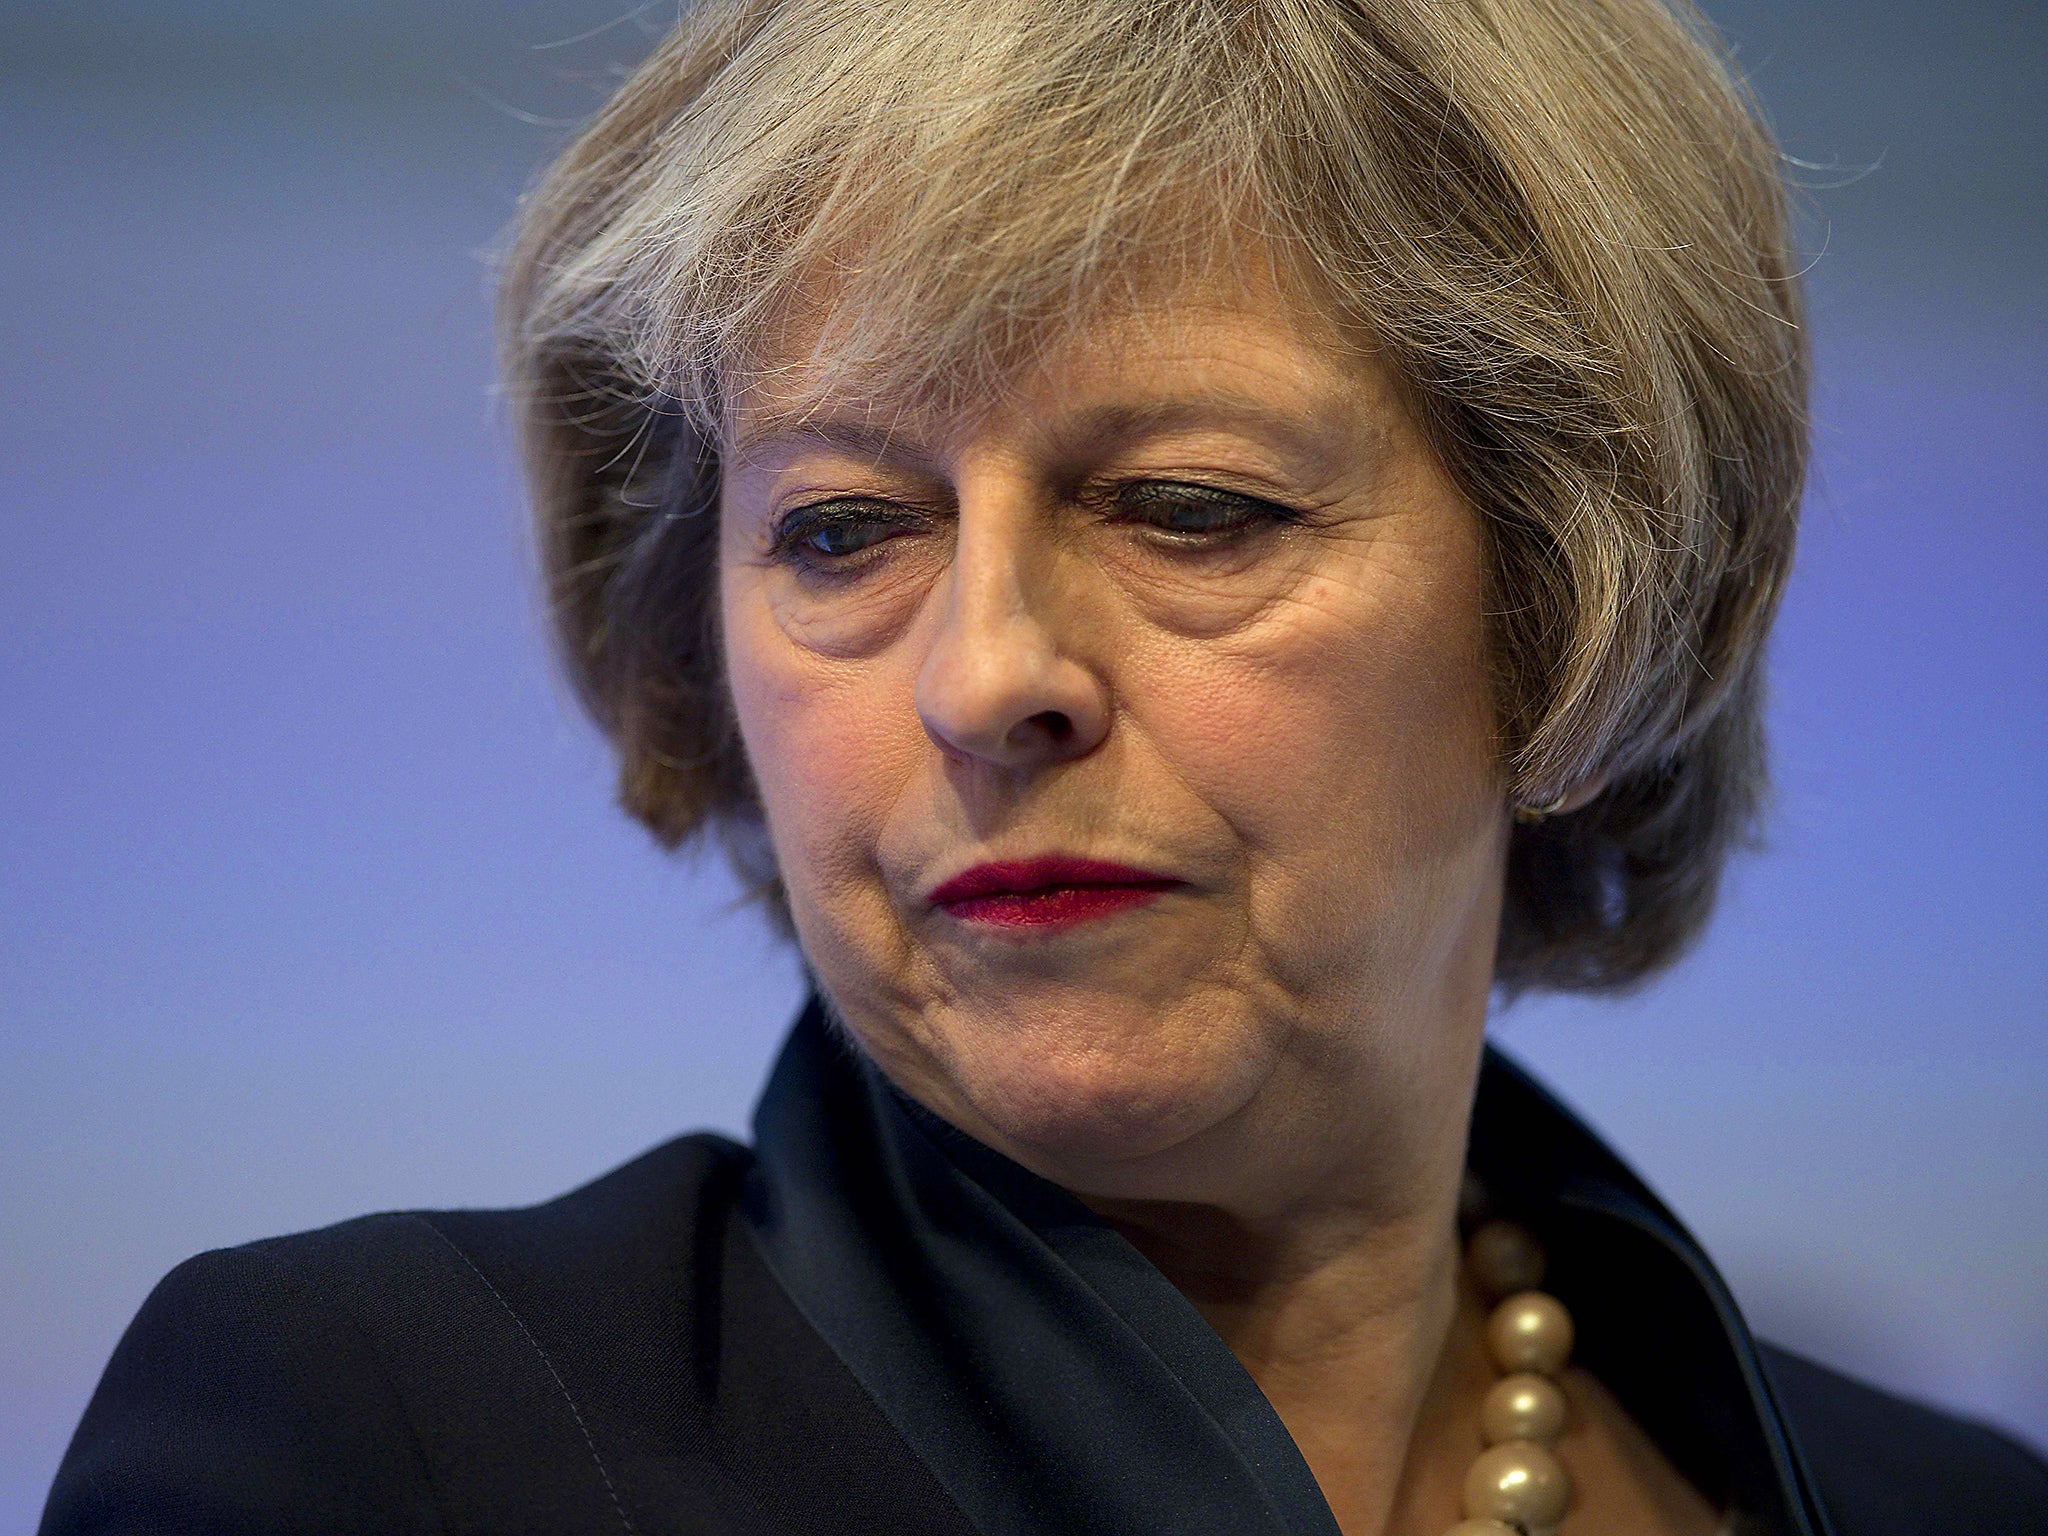 The Prime Minister faces a fresh challenge over whether or not Britain will leave the European Economic Area